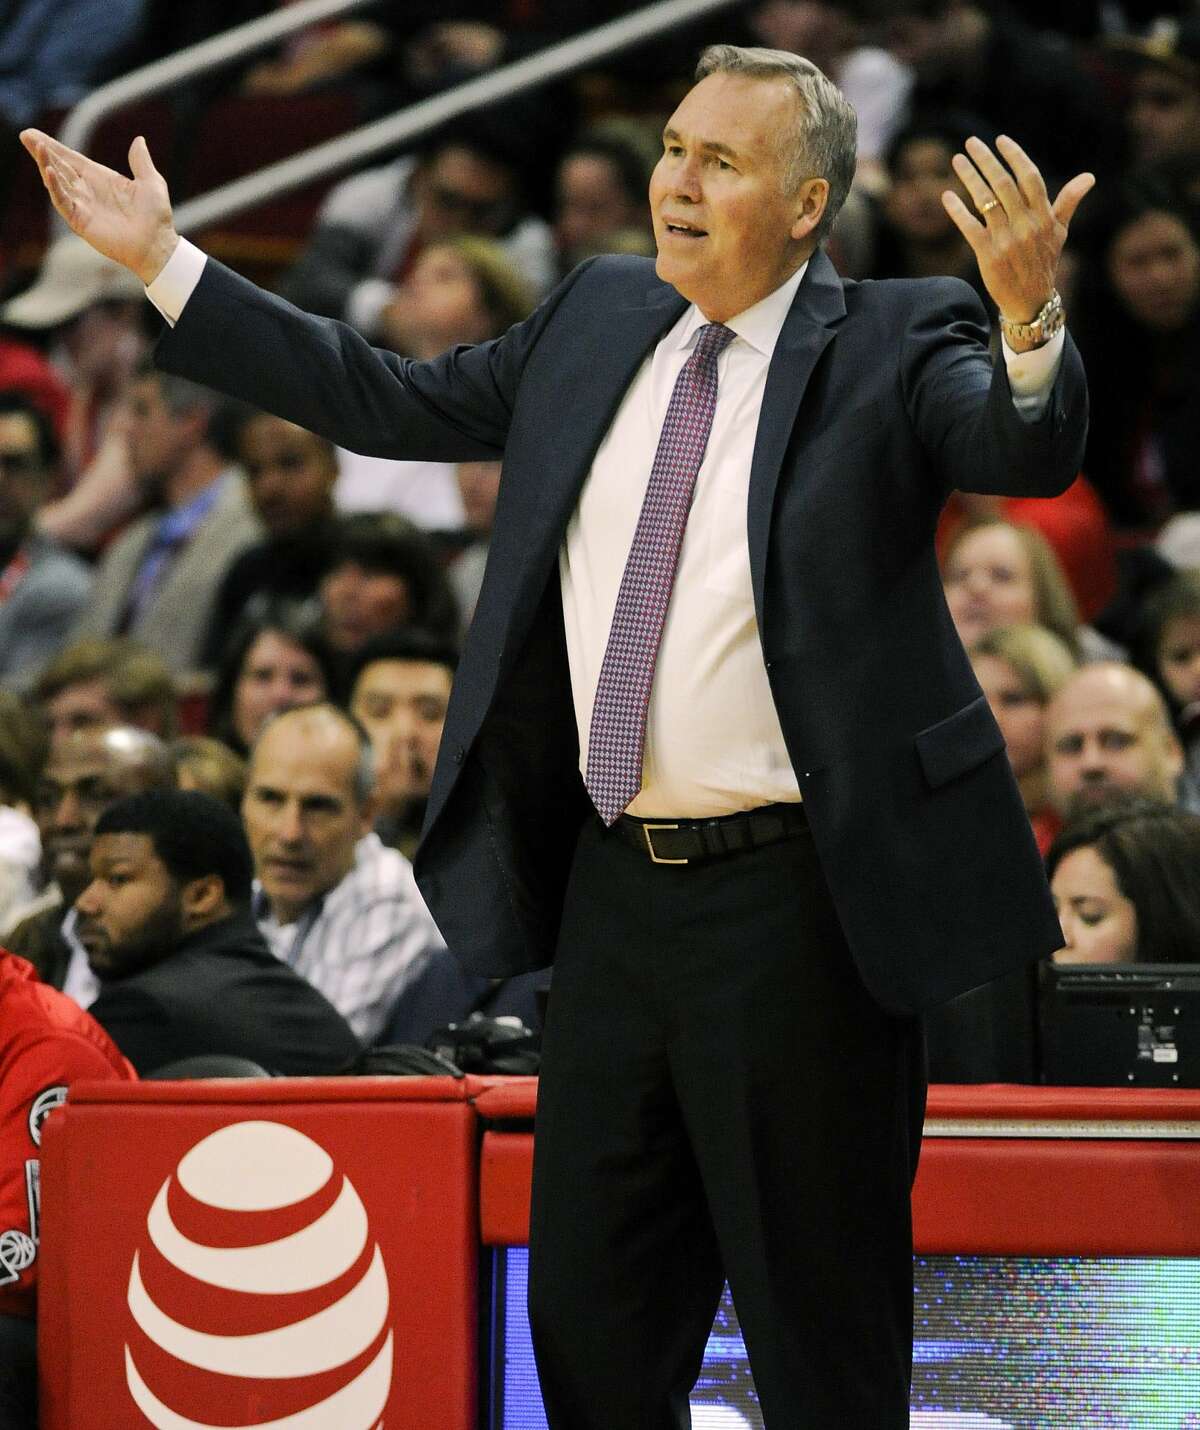 Houston Rockets head coach Mike D'Antoni watches from the sidelines in the first half of an NBA basketball game against the Memphis Grizzlies, Saturday, March 4, 2017, in Houston. (AP Photo/Eric Christian Smith)